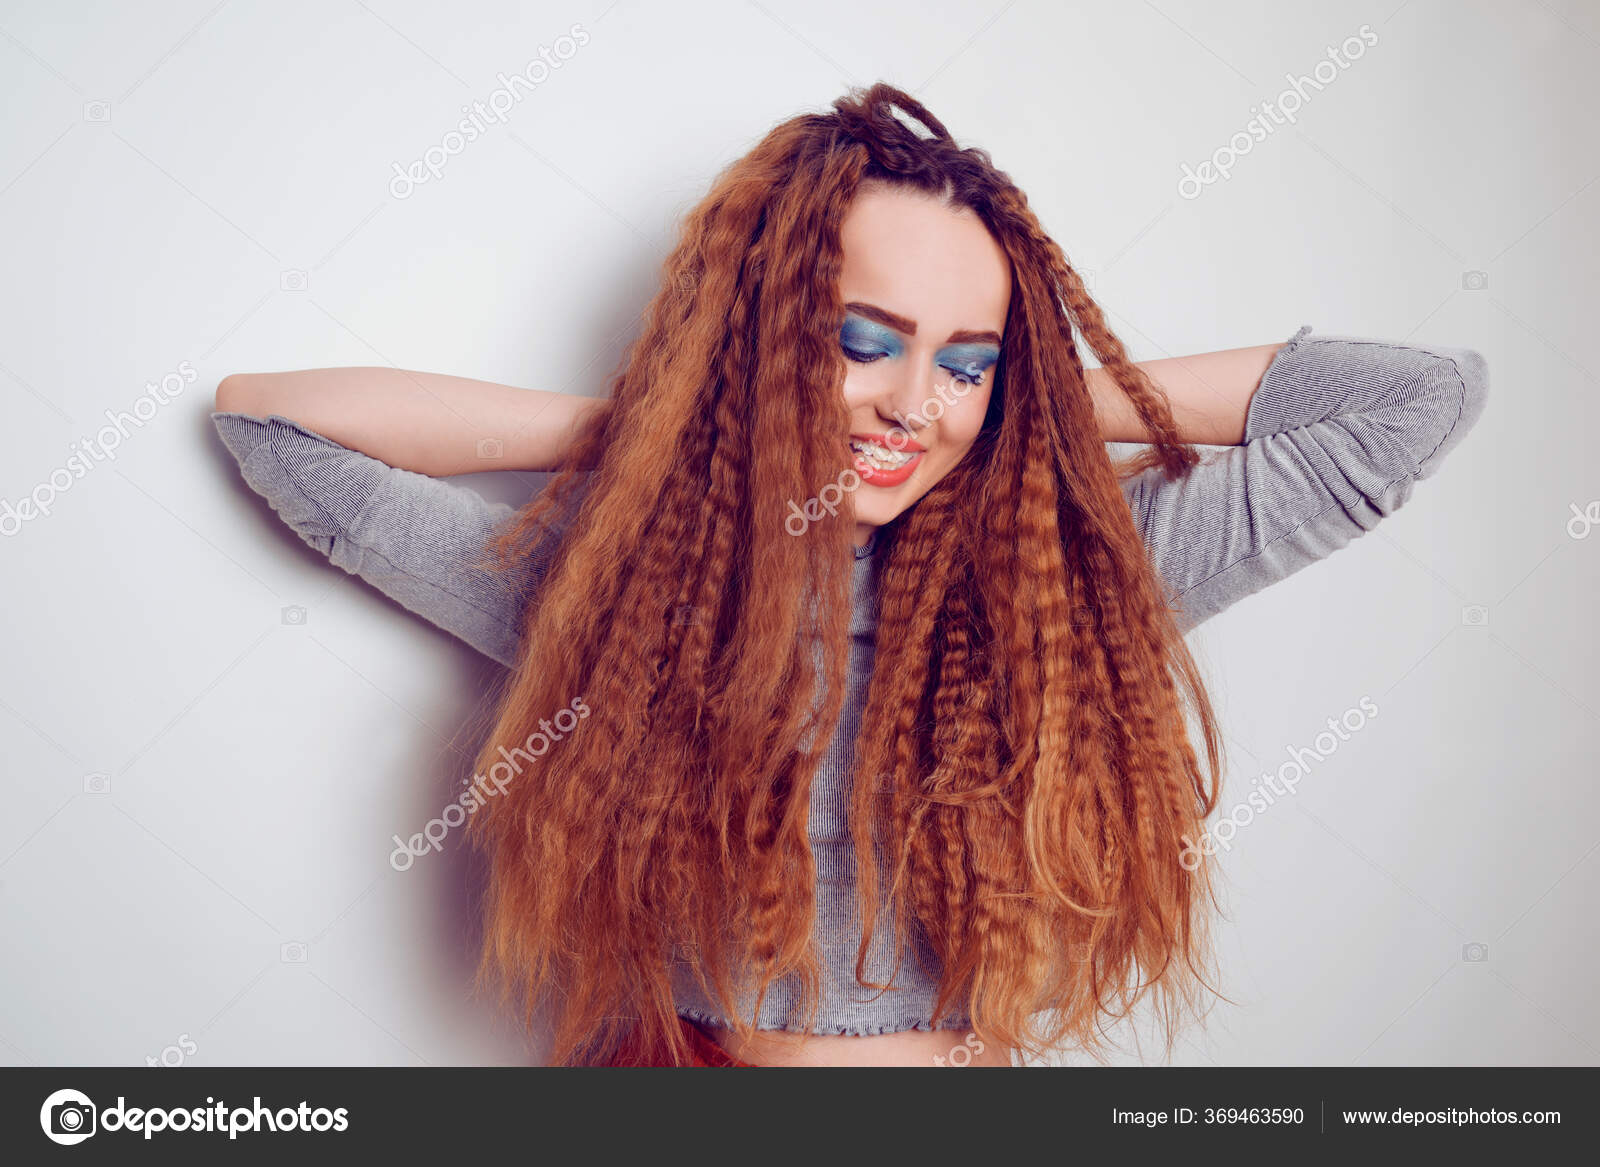 Girl Voluminous Hair Model Hairstyle Style 80S 90S Bright by ©MoreThanProduction 369463590